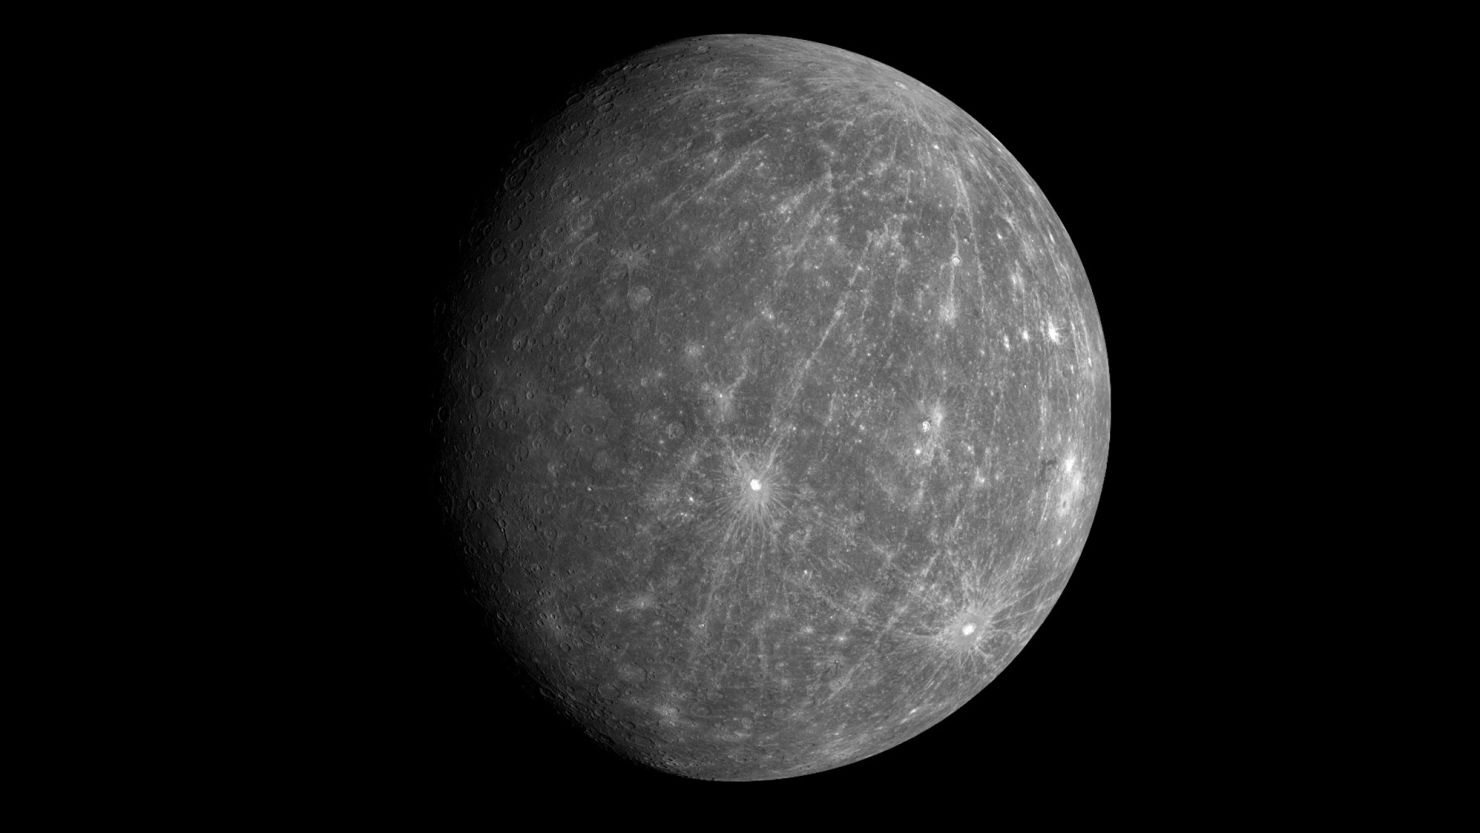 Carbon from tiny meteorites has gradually darkened Mercury's surface, researchers say.